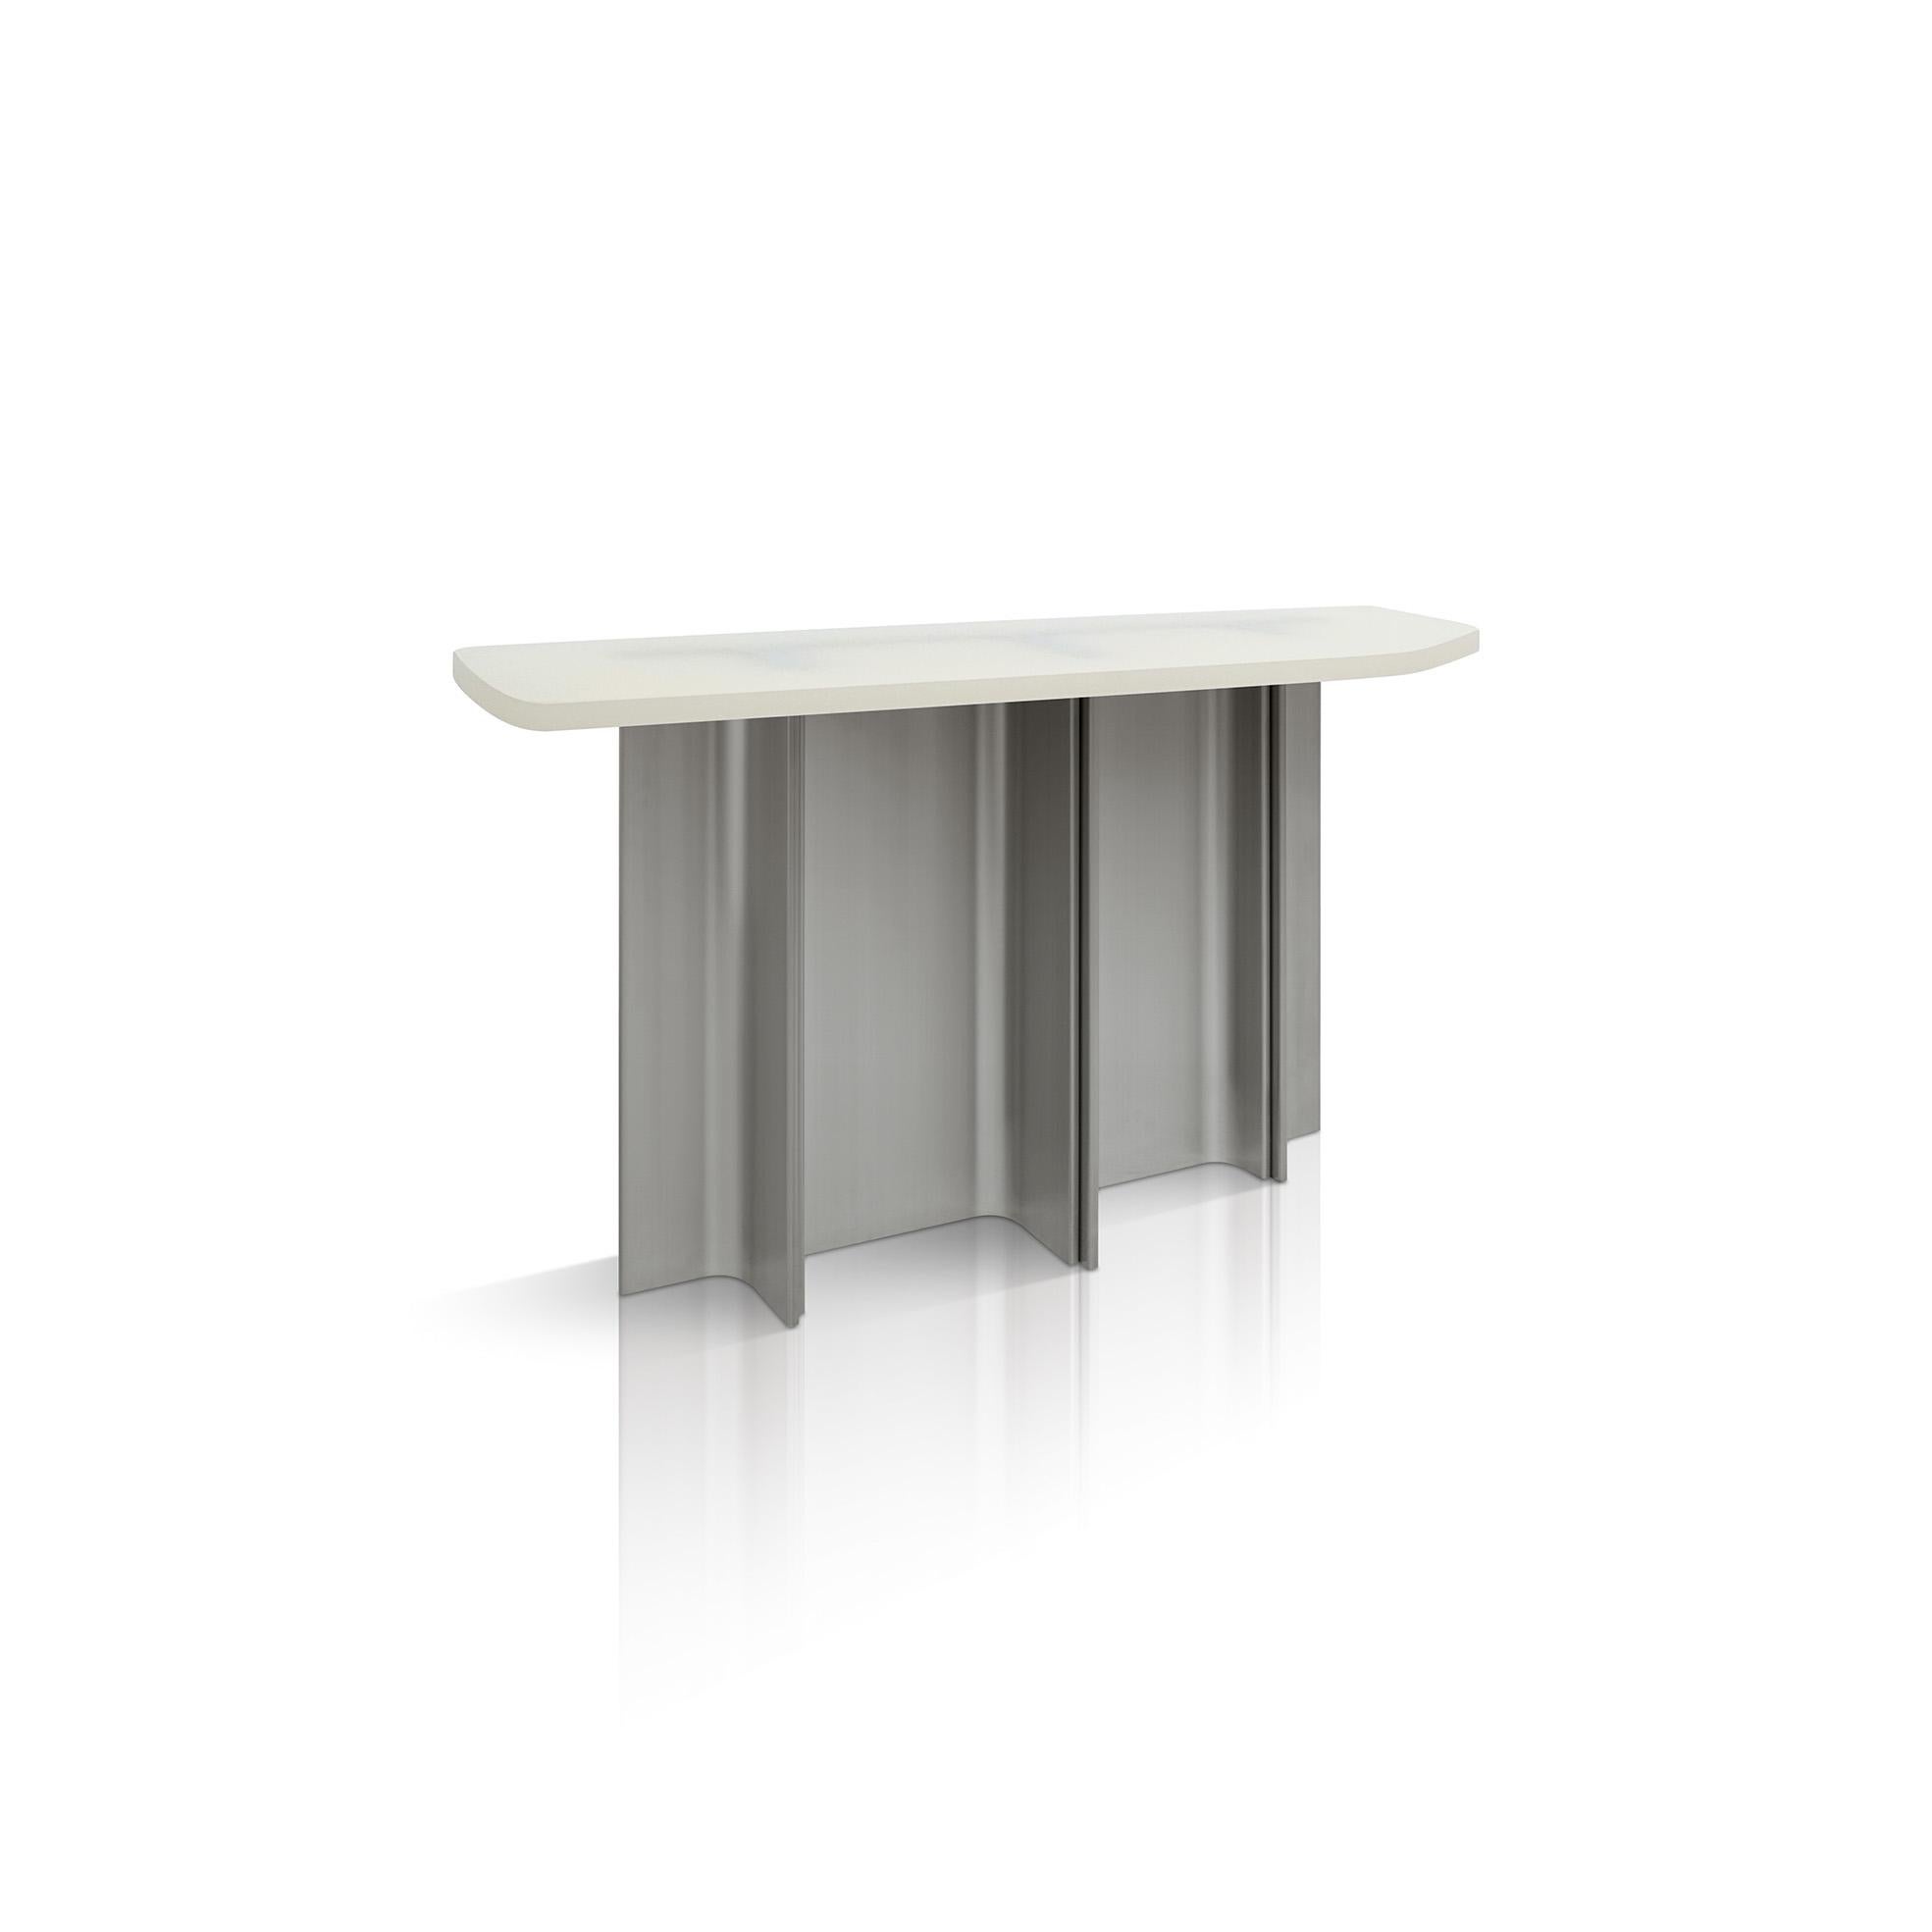 The Fossil Tables are inspired by an unusually combination of archaeology and Mies van der Rohe’s columns in the Barcelona Pavillion. As one lounges around the Fossil tables, the supporting structure is exposed through the translucent resin top -